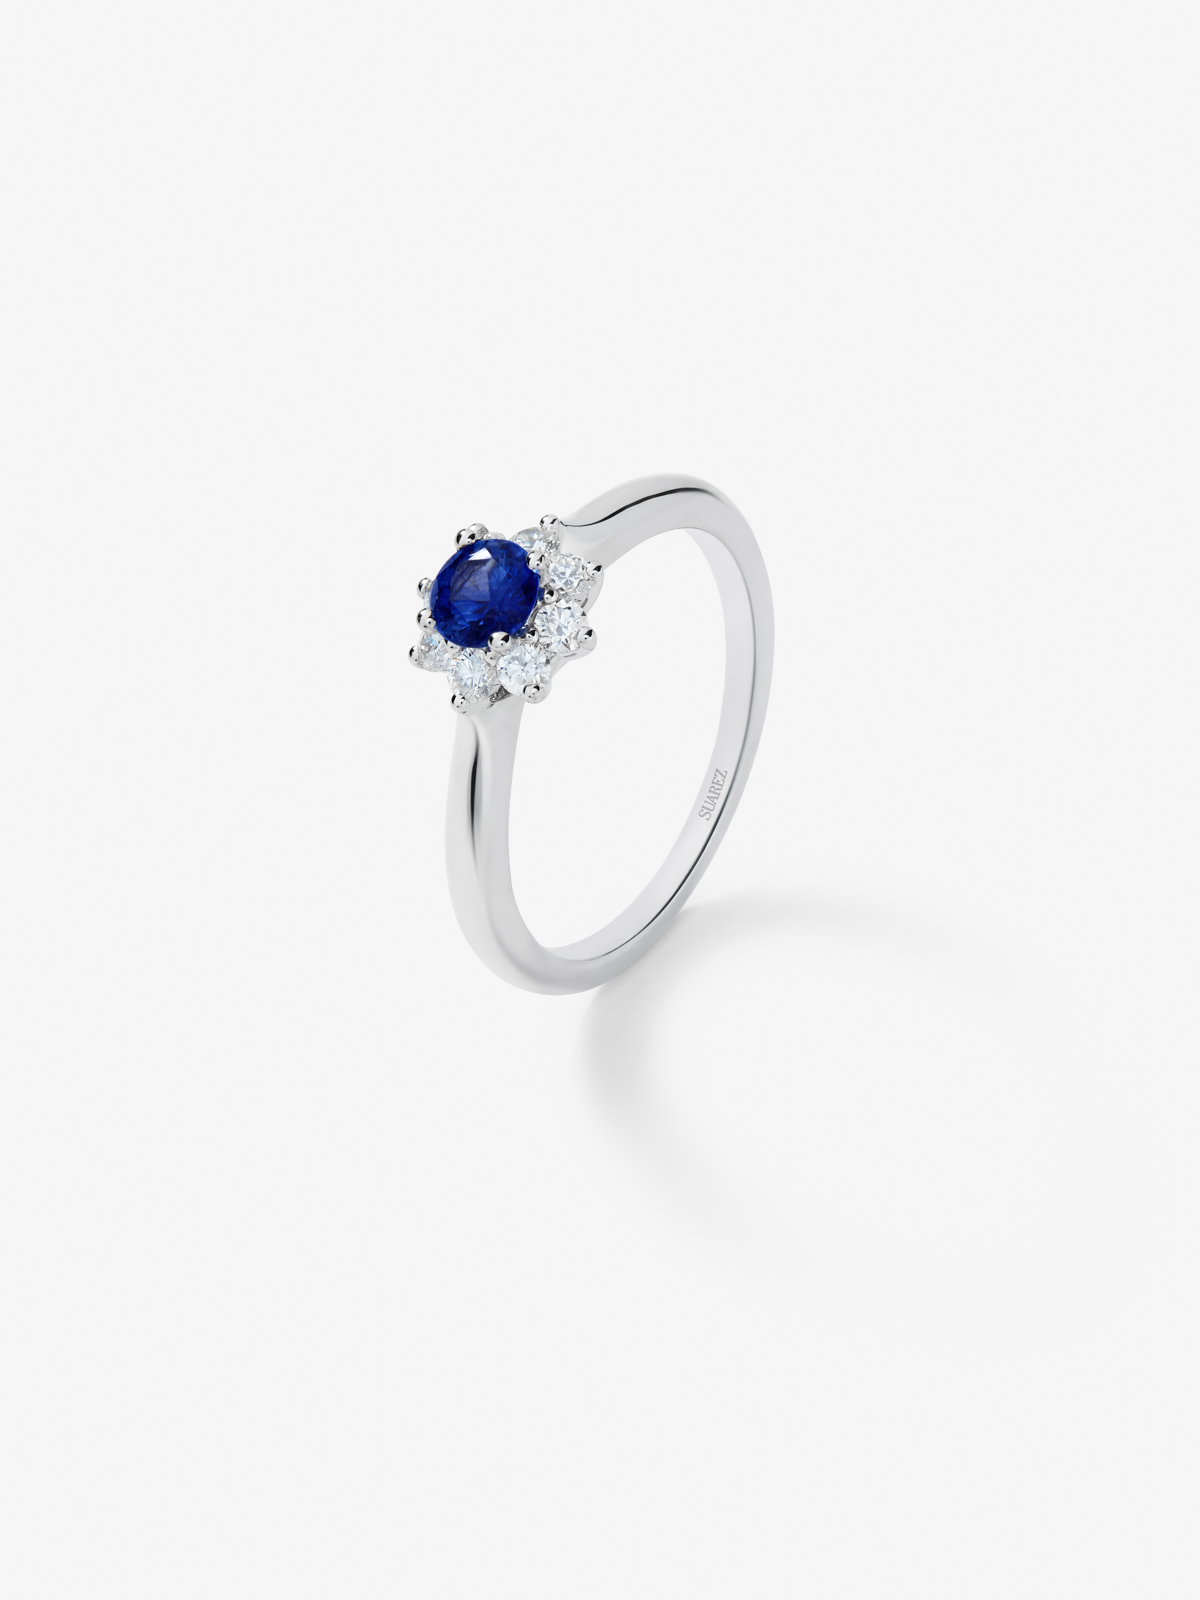 18K White Gold Ring with Royal Blue Sapp